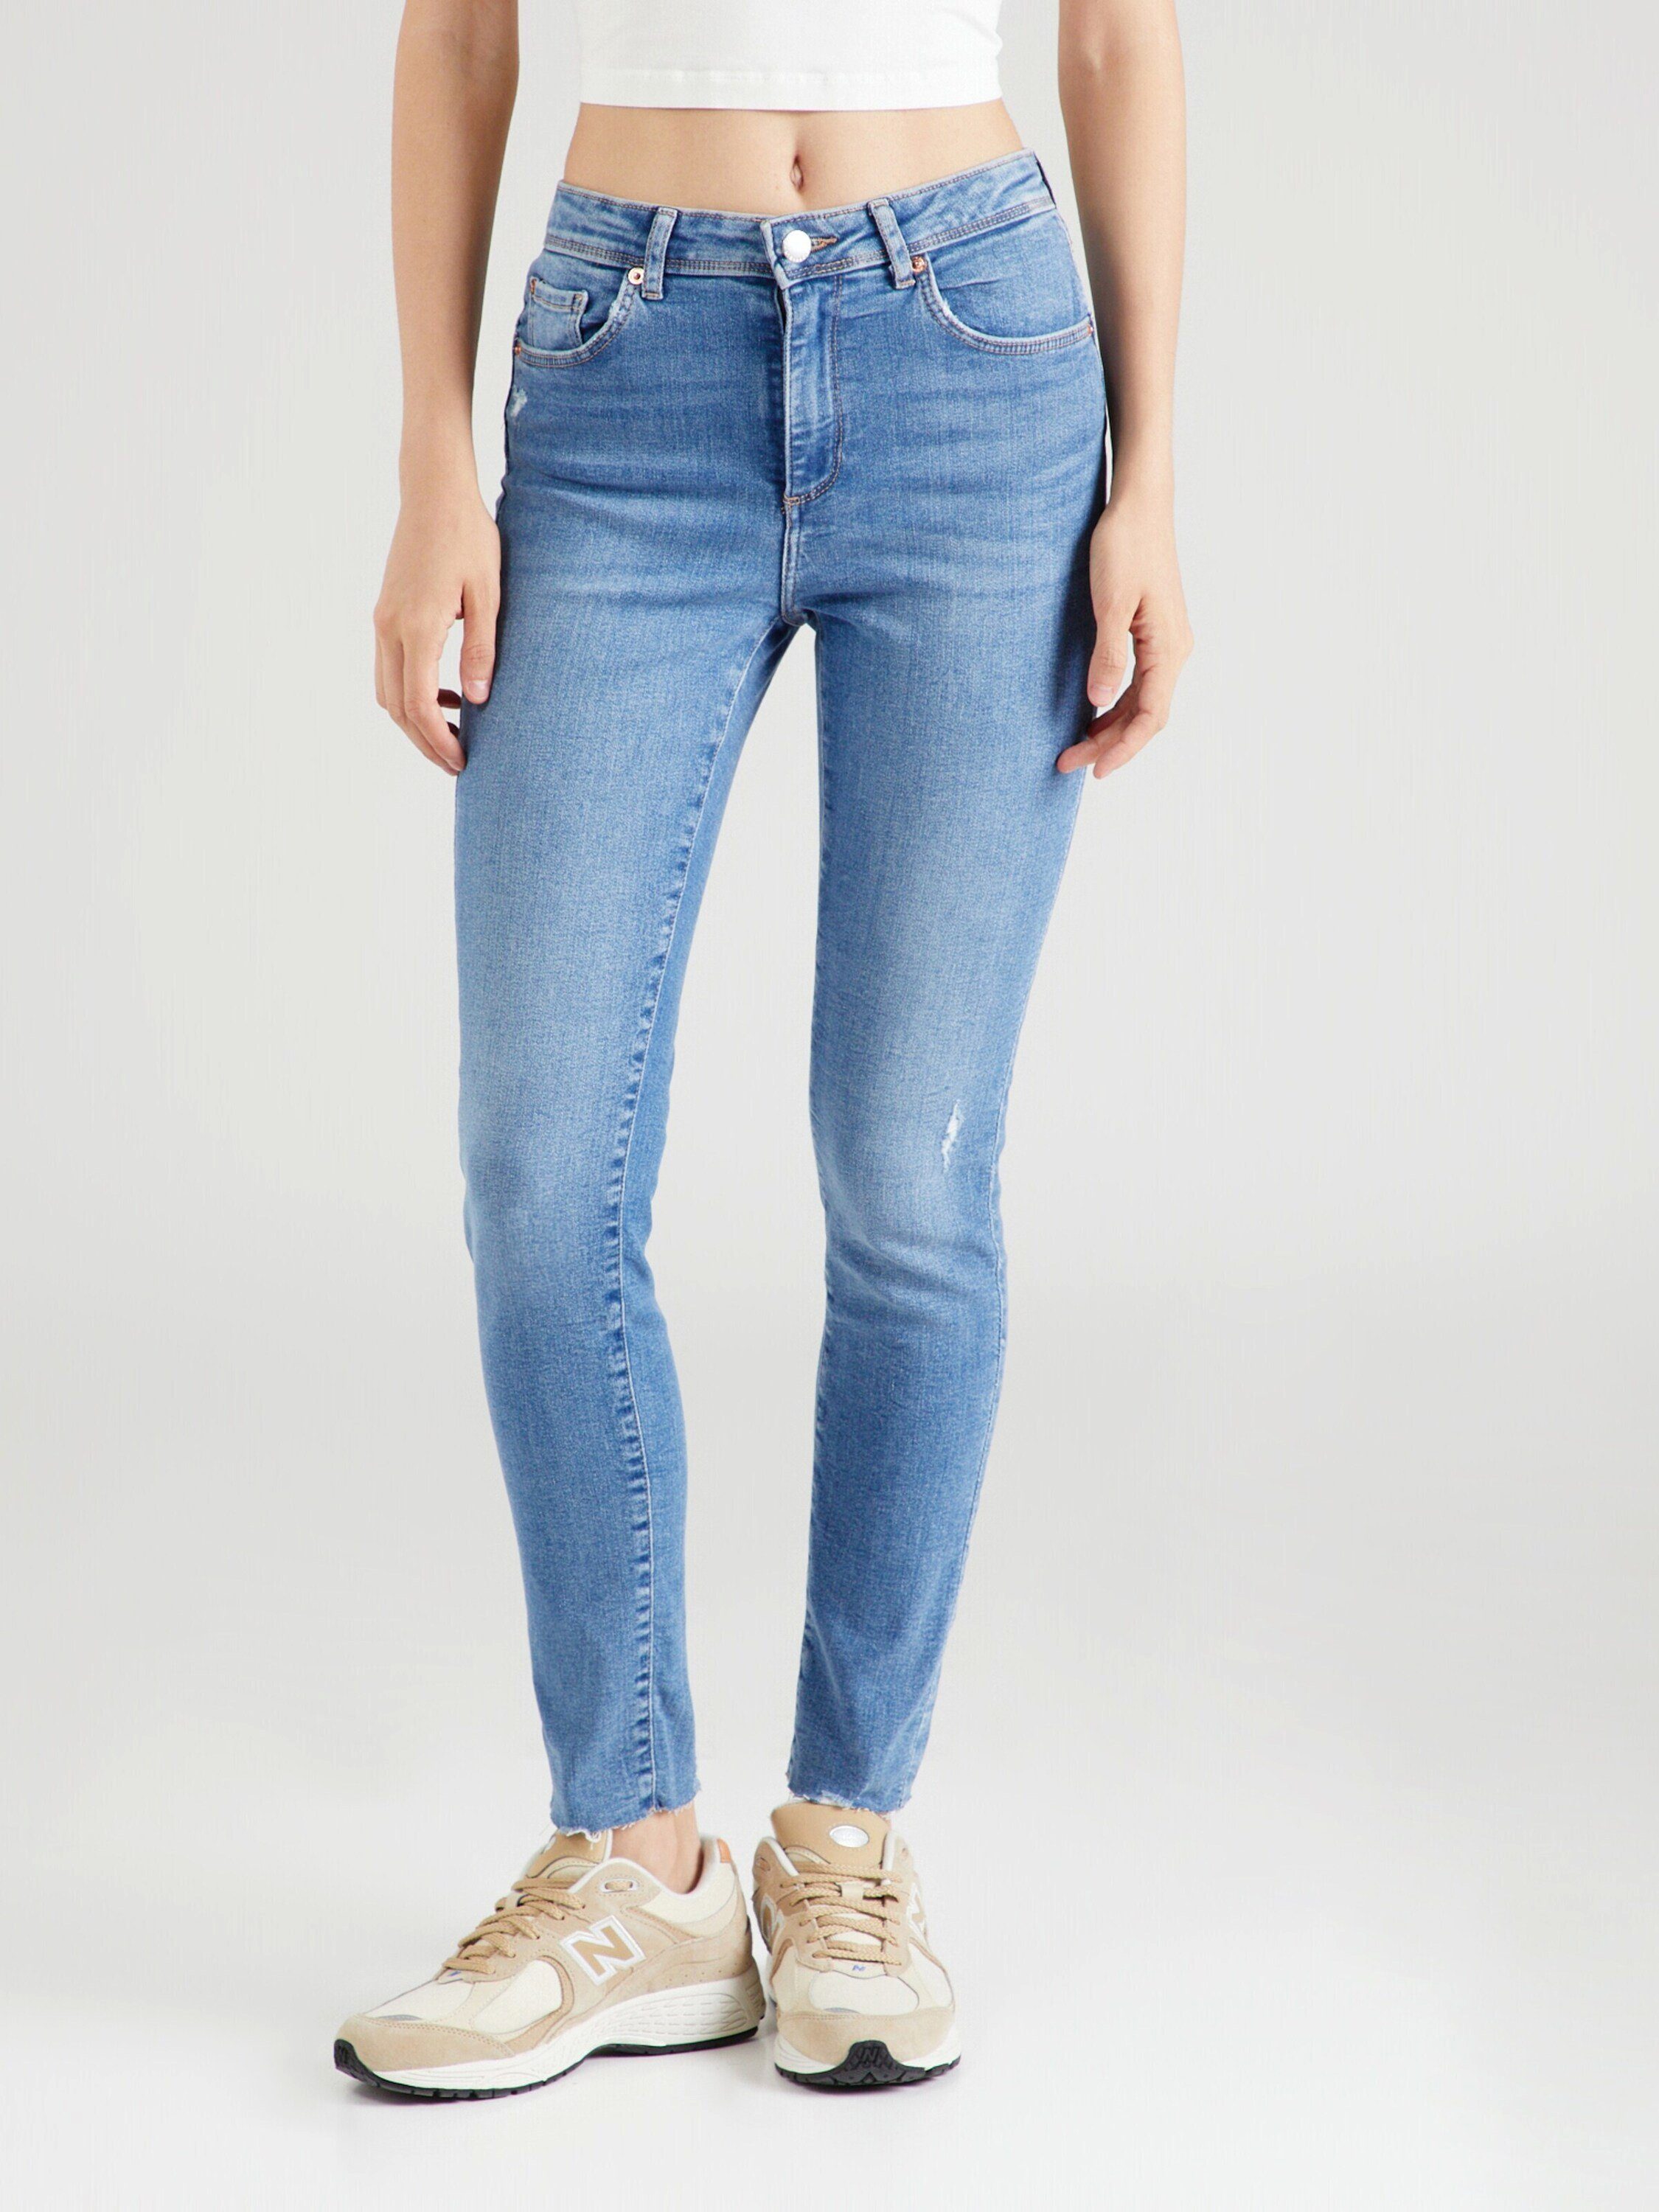 Weiteres Weijl (1-tlg) Detail Tally Skinny-fit-Jeans